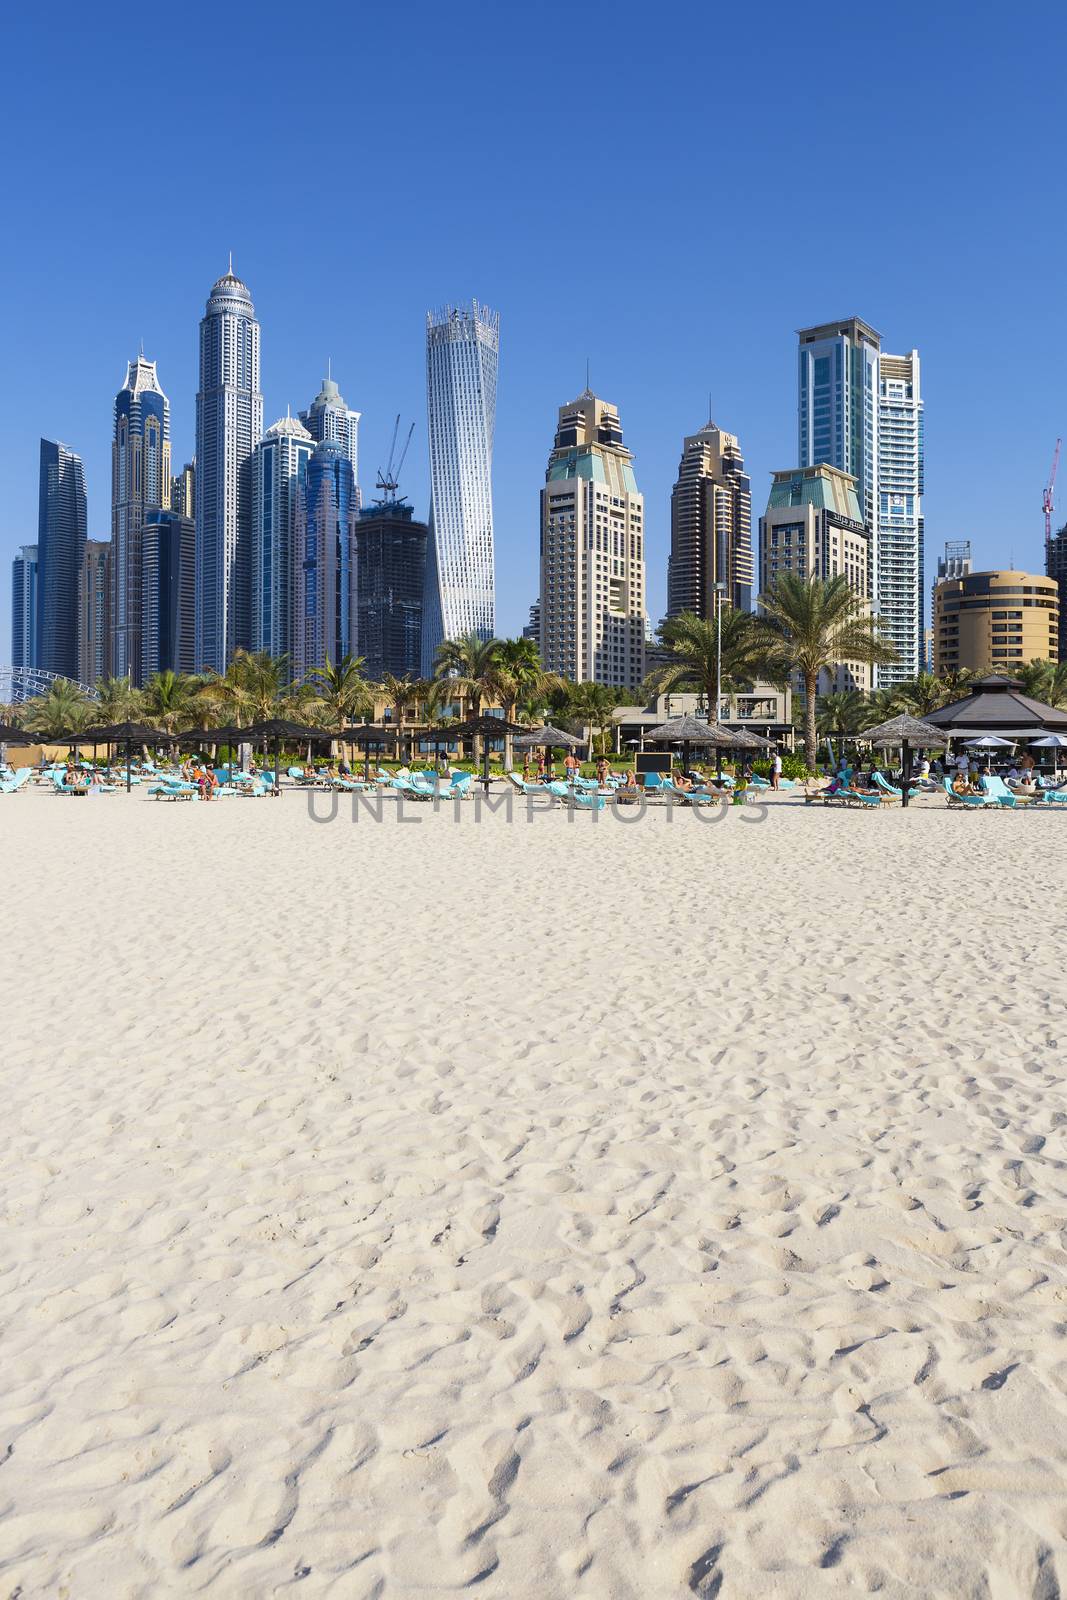 Vertical view of famous skyscrapers and jumeirah beach by vwalakte